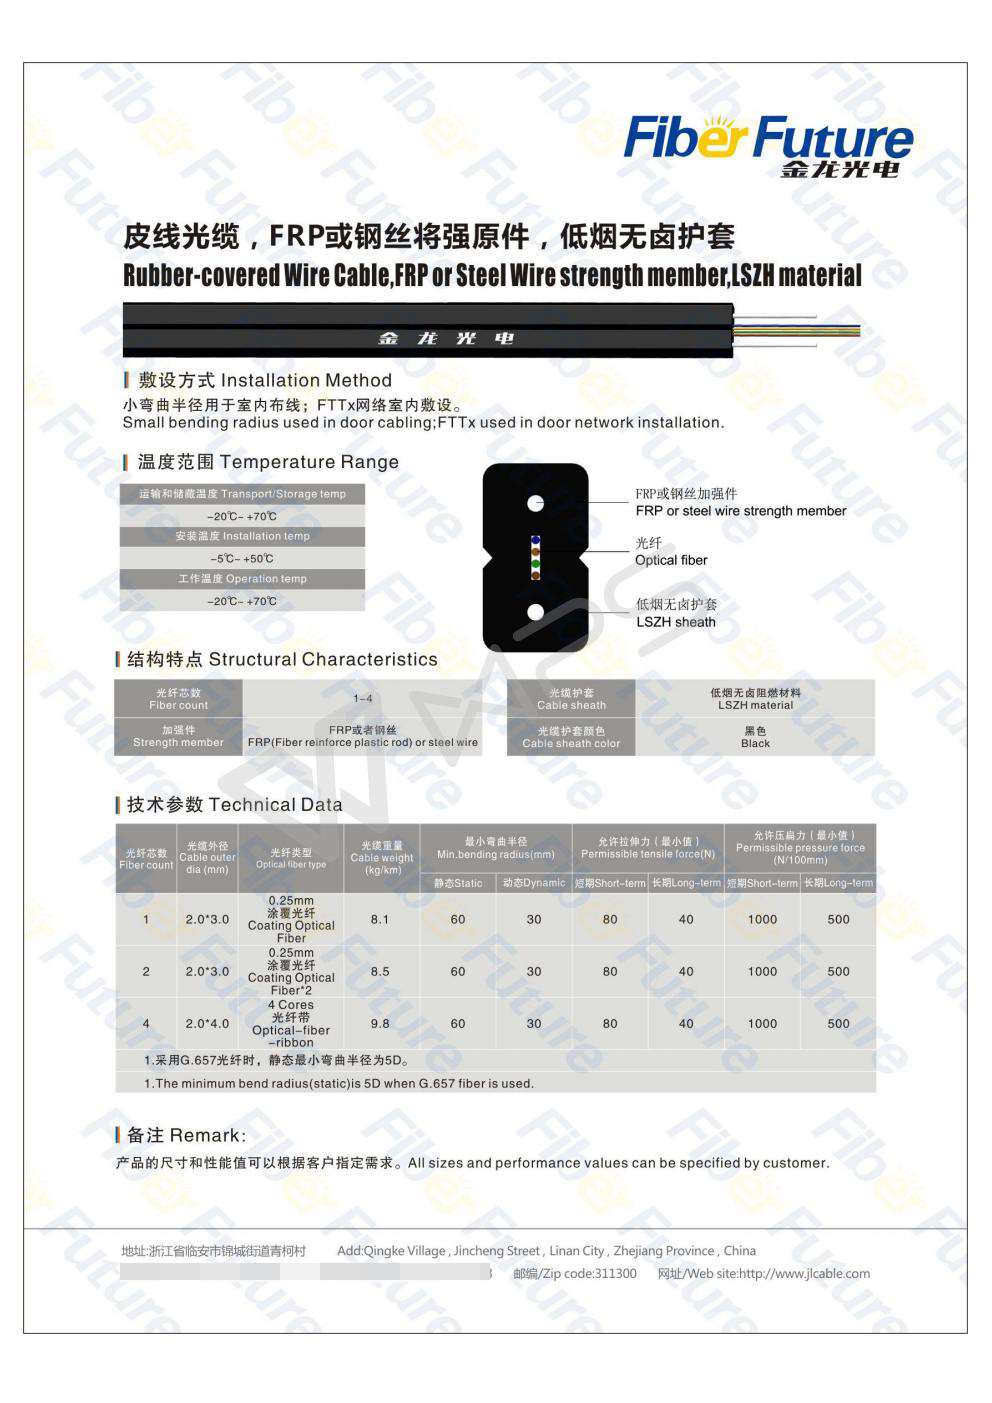 FTTX Used in Door Network Installation High Quality 1-4 Fiber Optic Fiber Cable